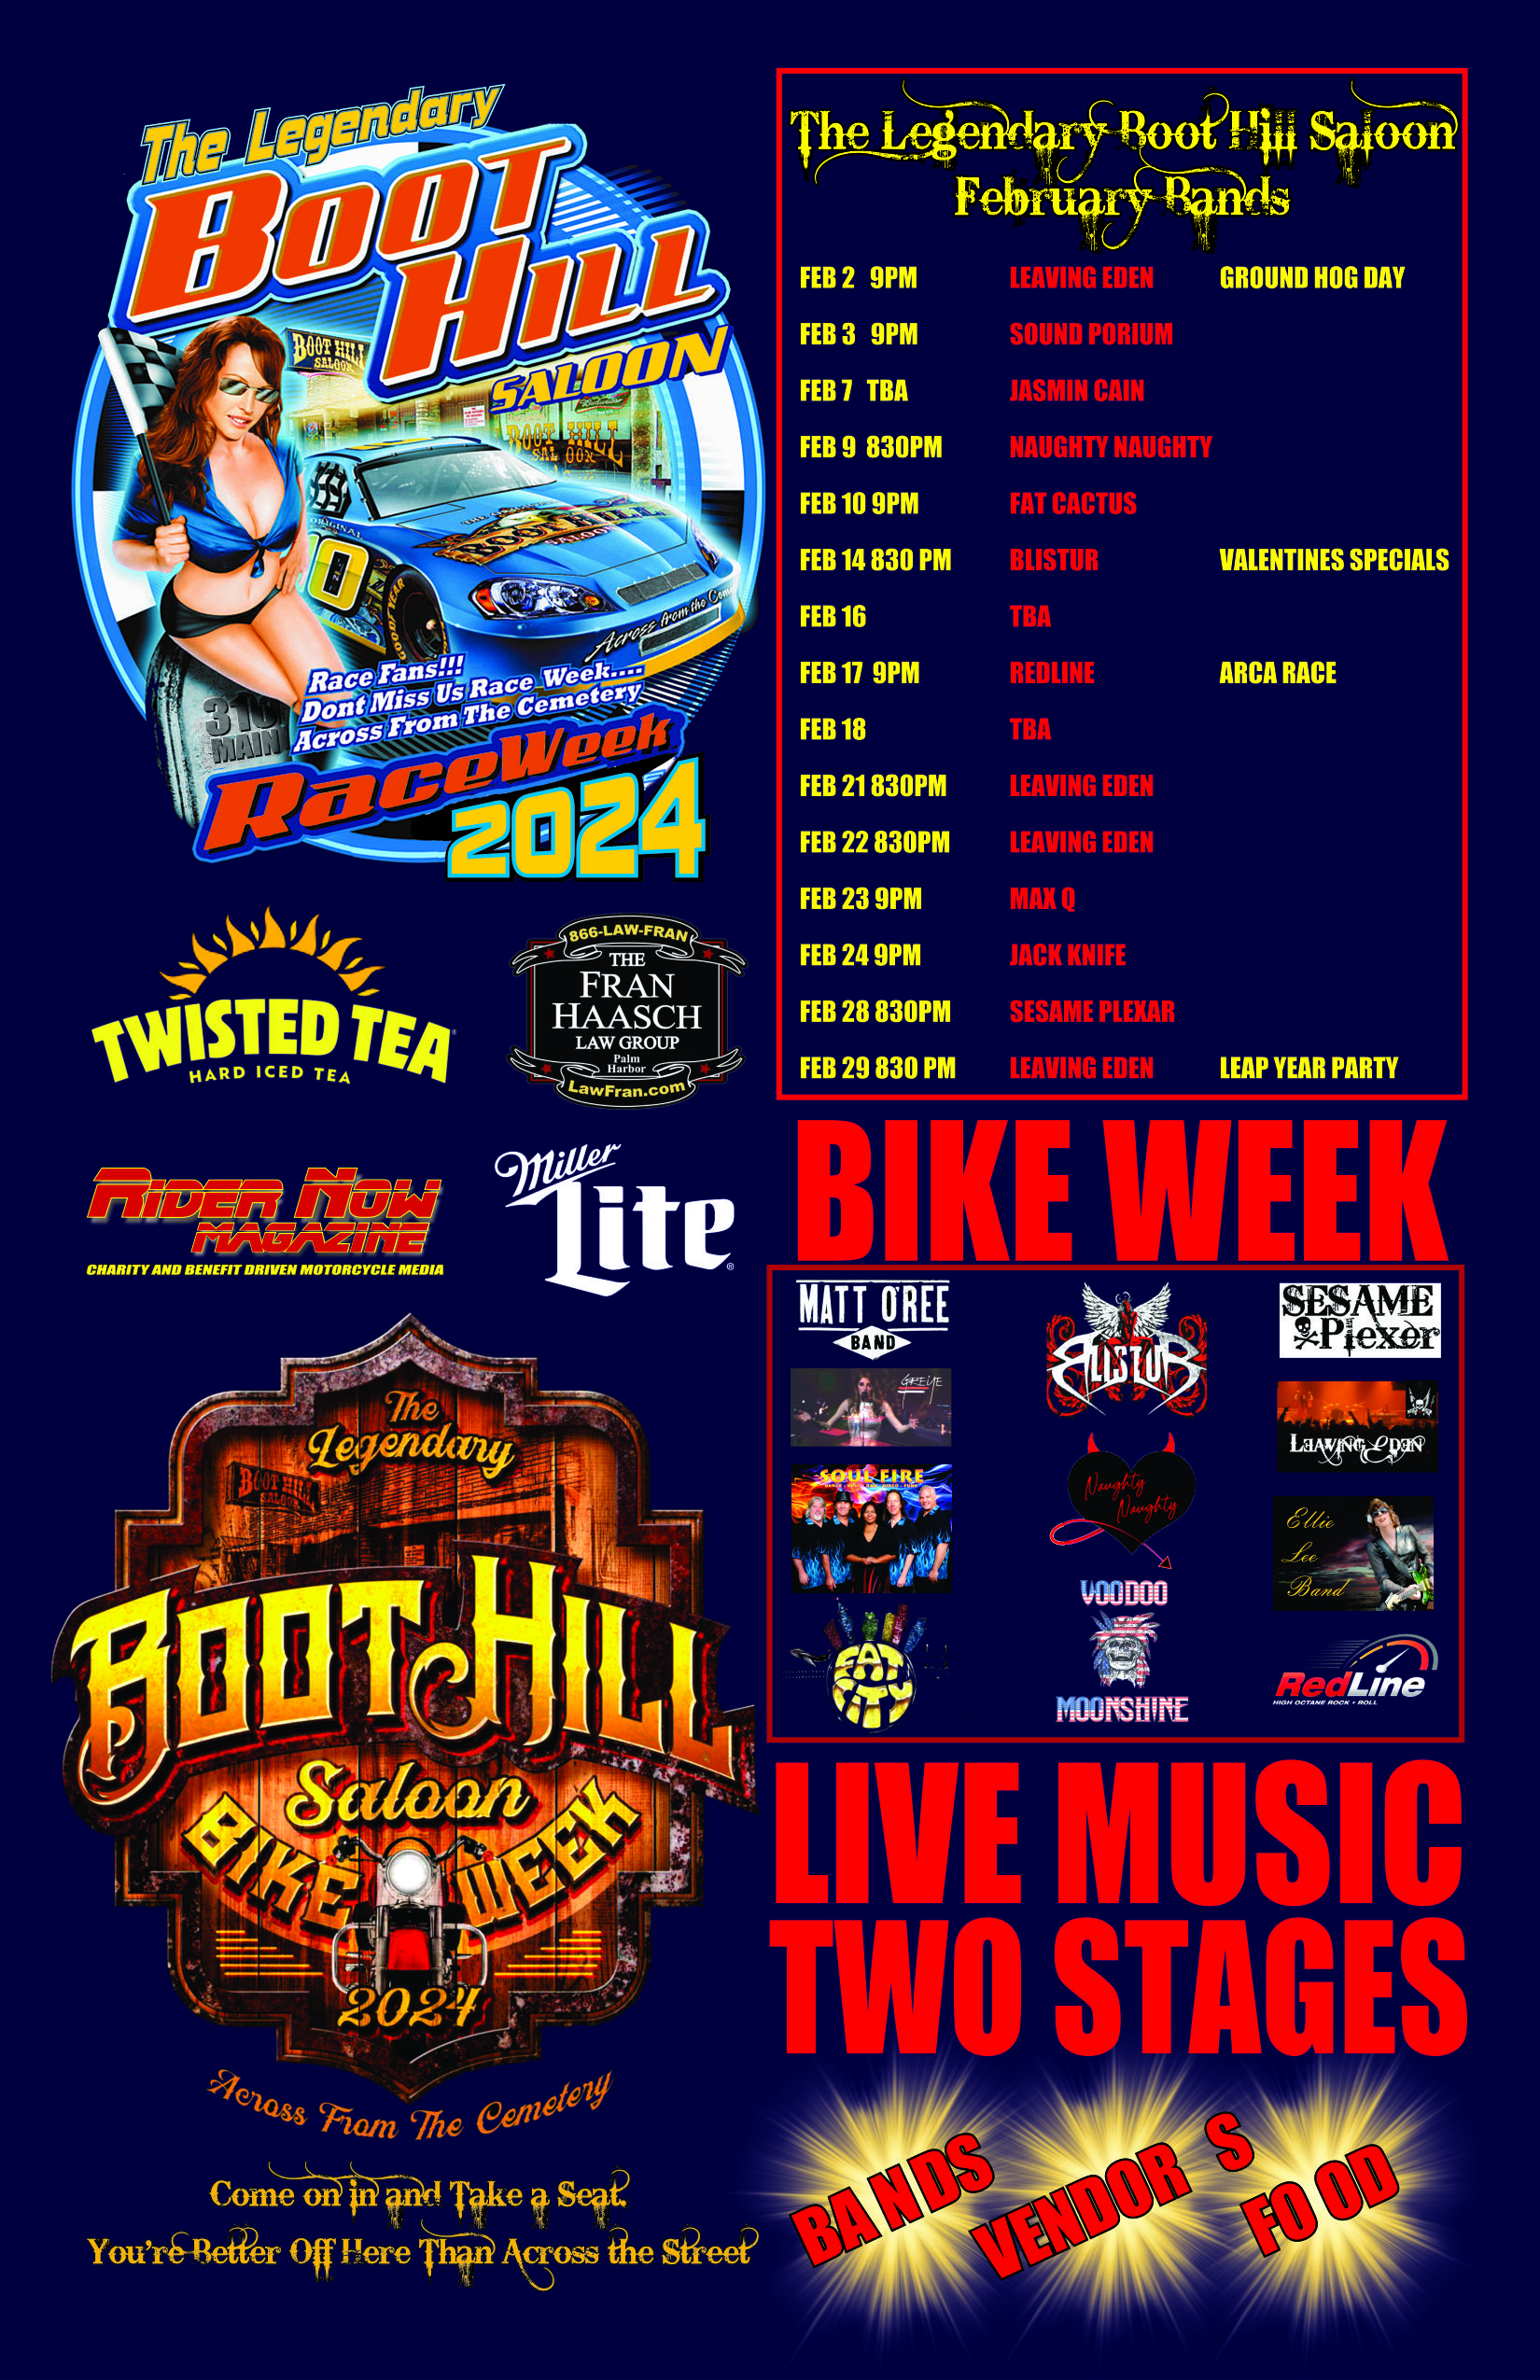 Boot Hill Saloon Events